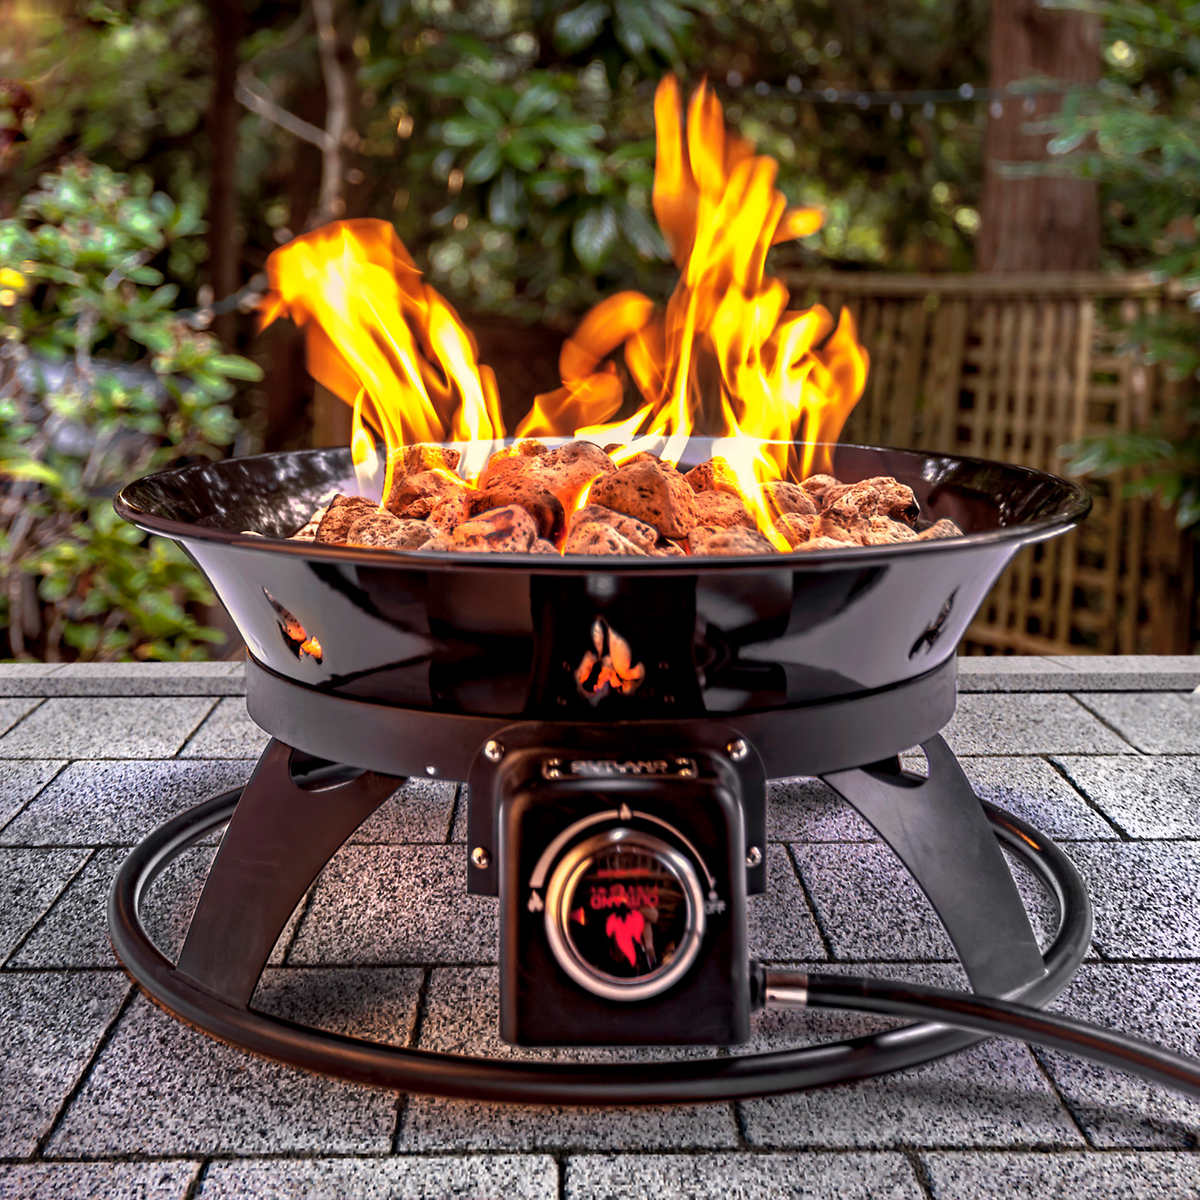 Outland Firebowl Outdoor Firepit Costco, Are Fire Pits Legal In California